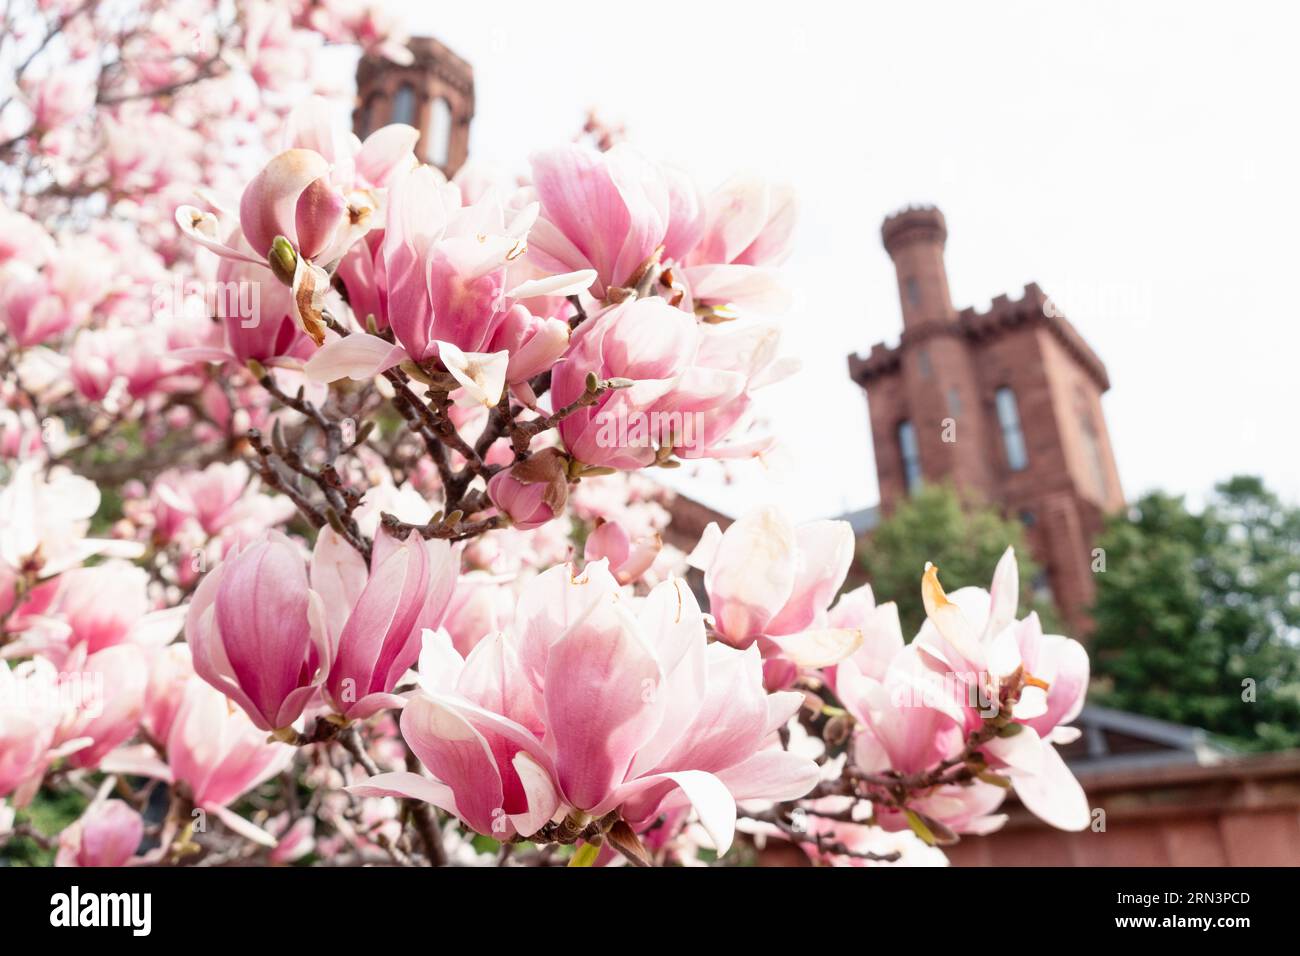 WASHINGTON DC, United States — Saucer Magnolias bloom in the Enid A Haupt Garden, providing a vibrant display against the backdrop of the Smithsonian Castle. The garden, adjacent to the National Mall, offers a serene spot for residents and tourists alike, showcasing a wide variety of plant species significant to the region. Part of the Smithsonian Castle can be seen in the background. Stock Photo